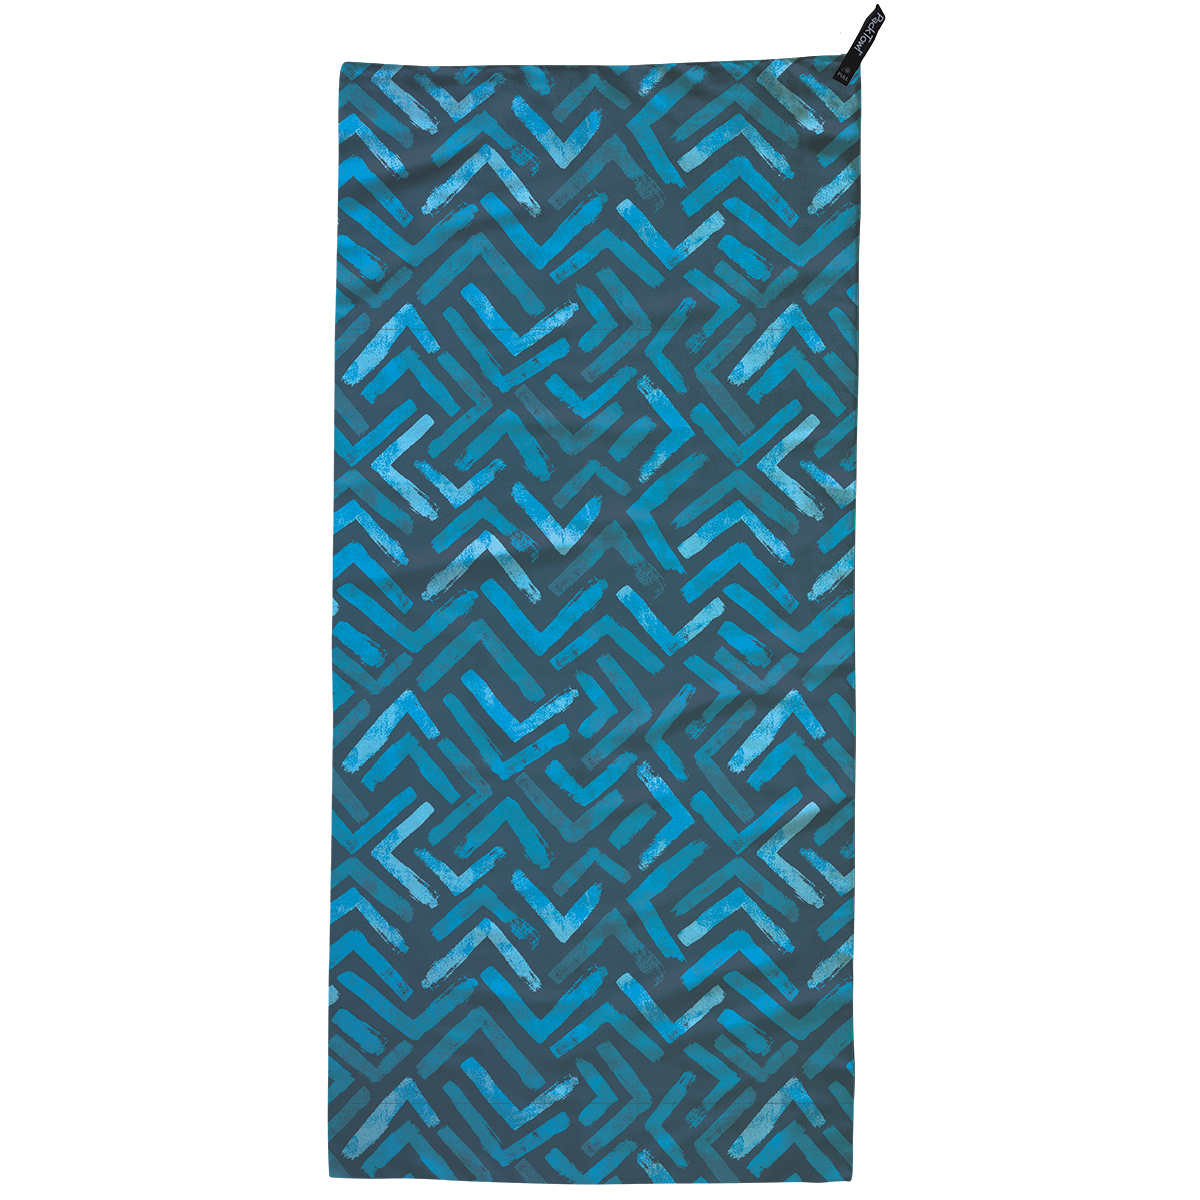 Packtowl Ultralite Towel, Hand Size